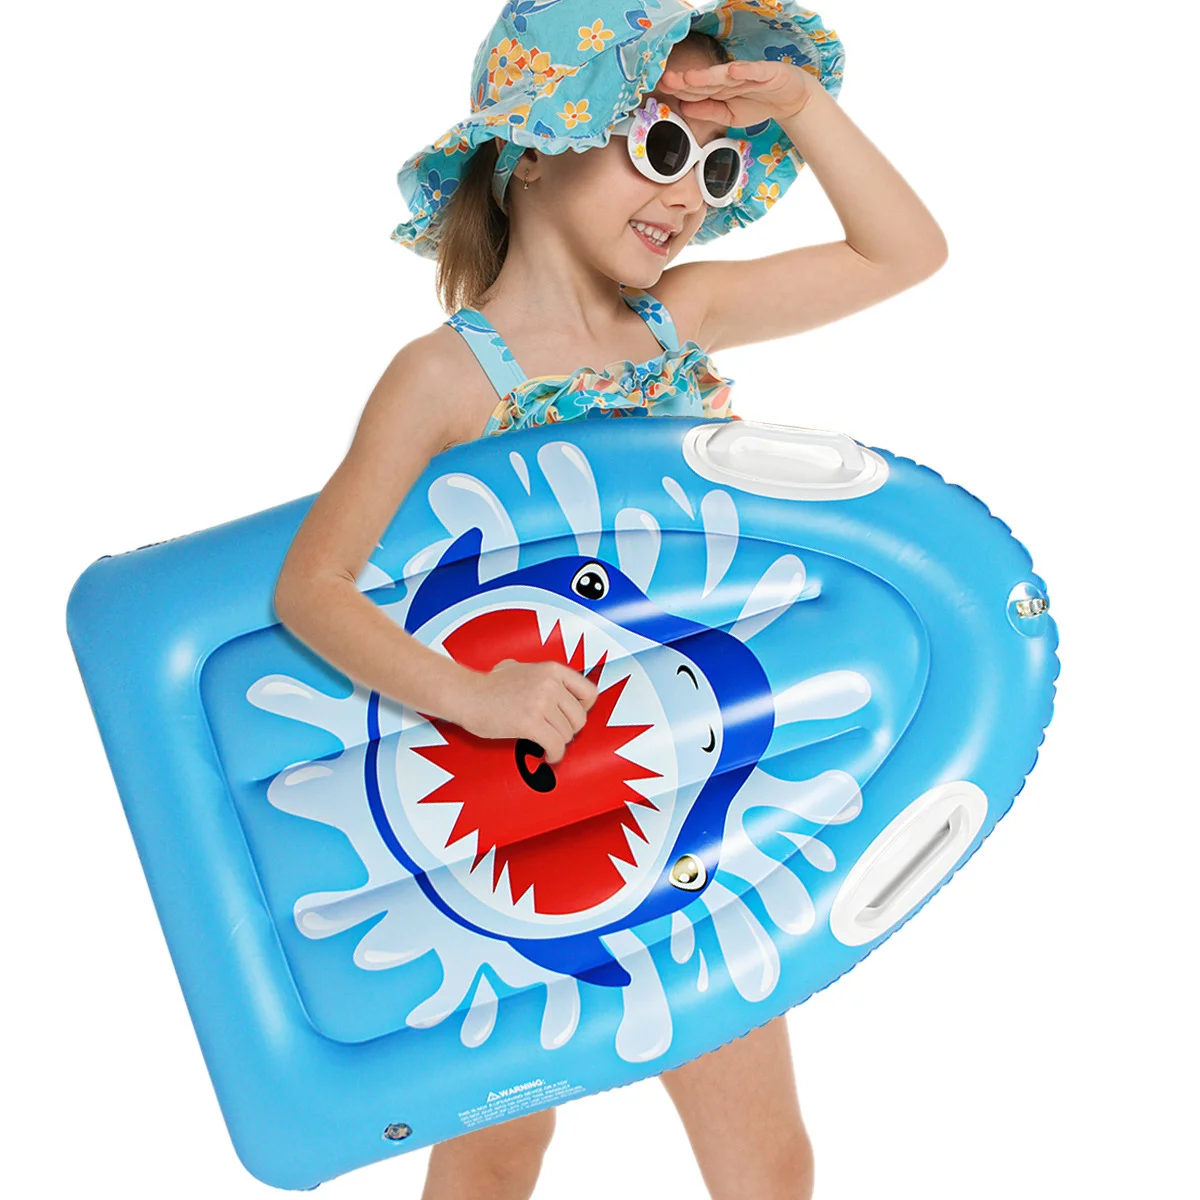 

PVC Inflatable Pool Float Raft for Kids and Adults Outdoor Summer Fun, Blue